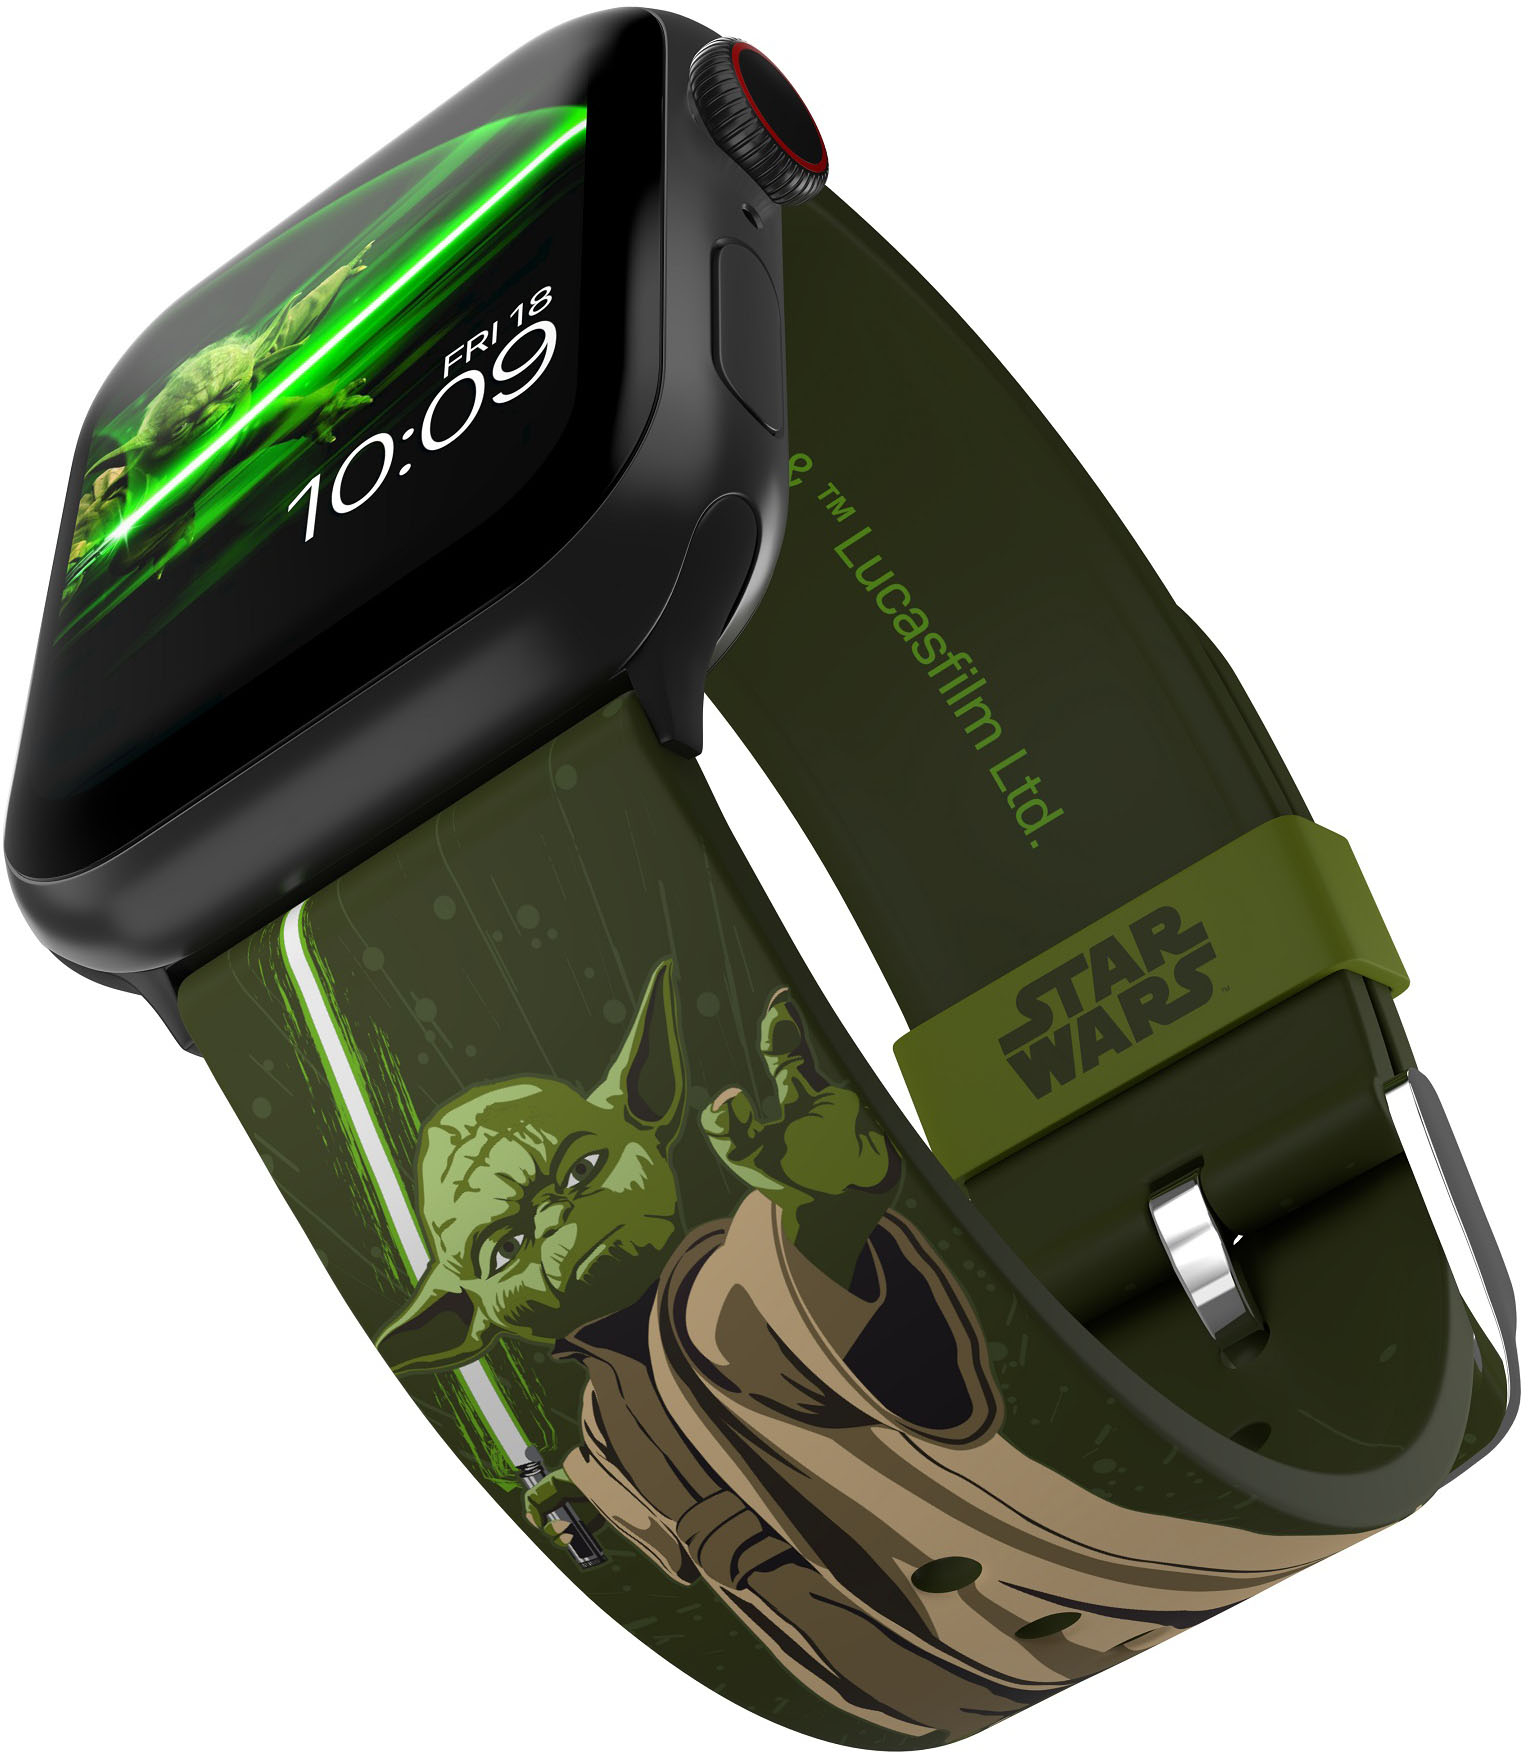 Angle View: MobyFox - STAR WARS -  Yoda Edition Smartwatch Band - Compatible with Apple Watch - Fits 38mm, 40mm, 42mm and 44mm